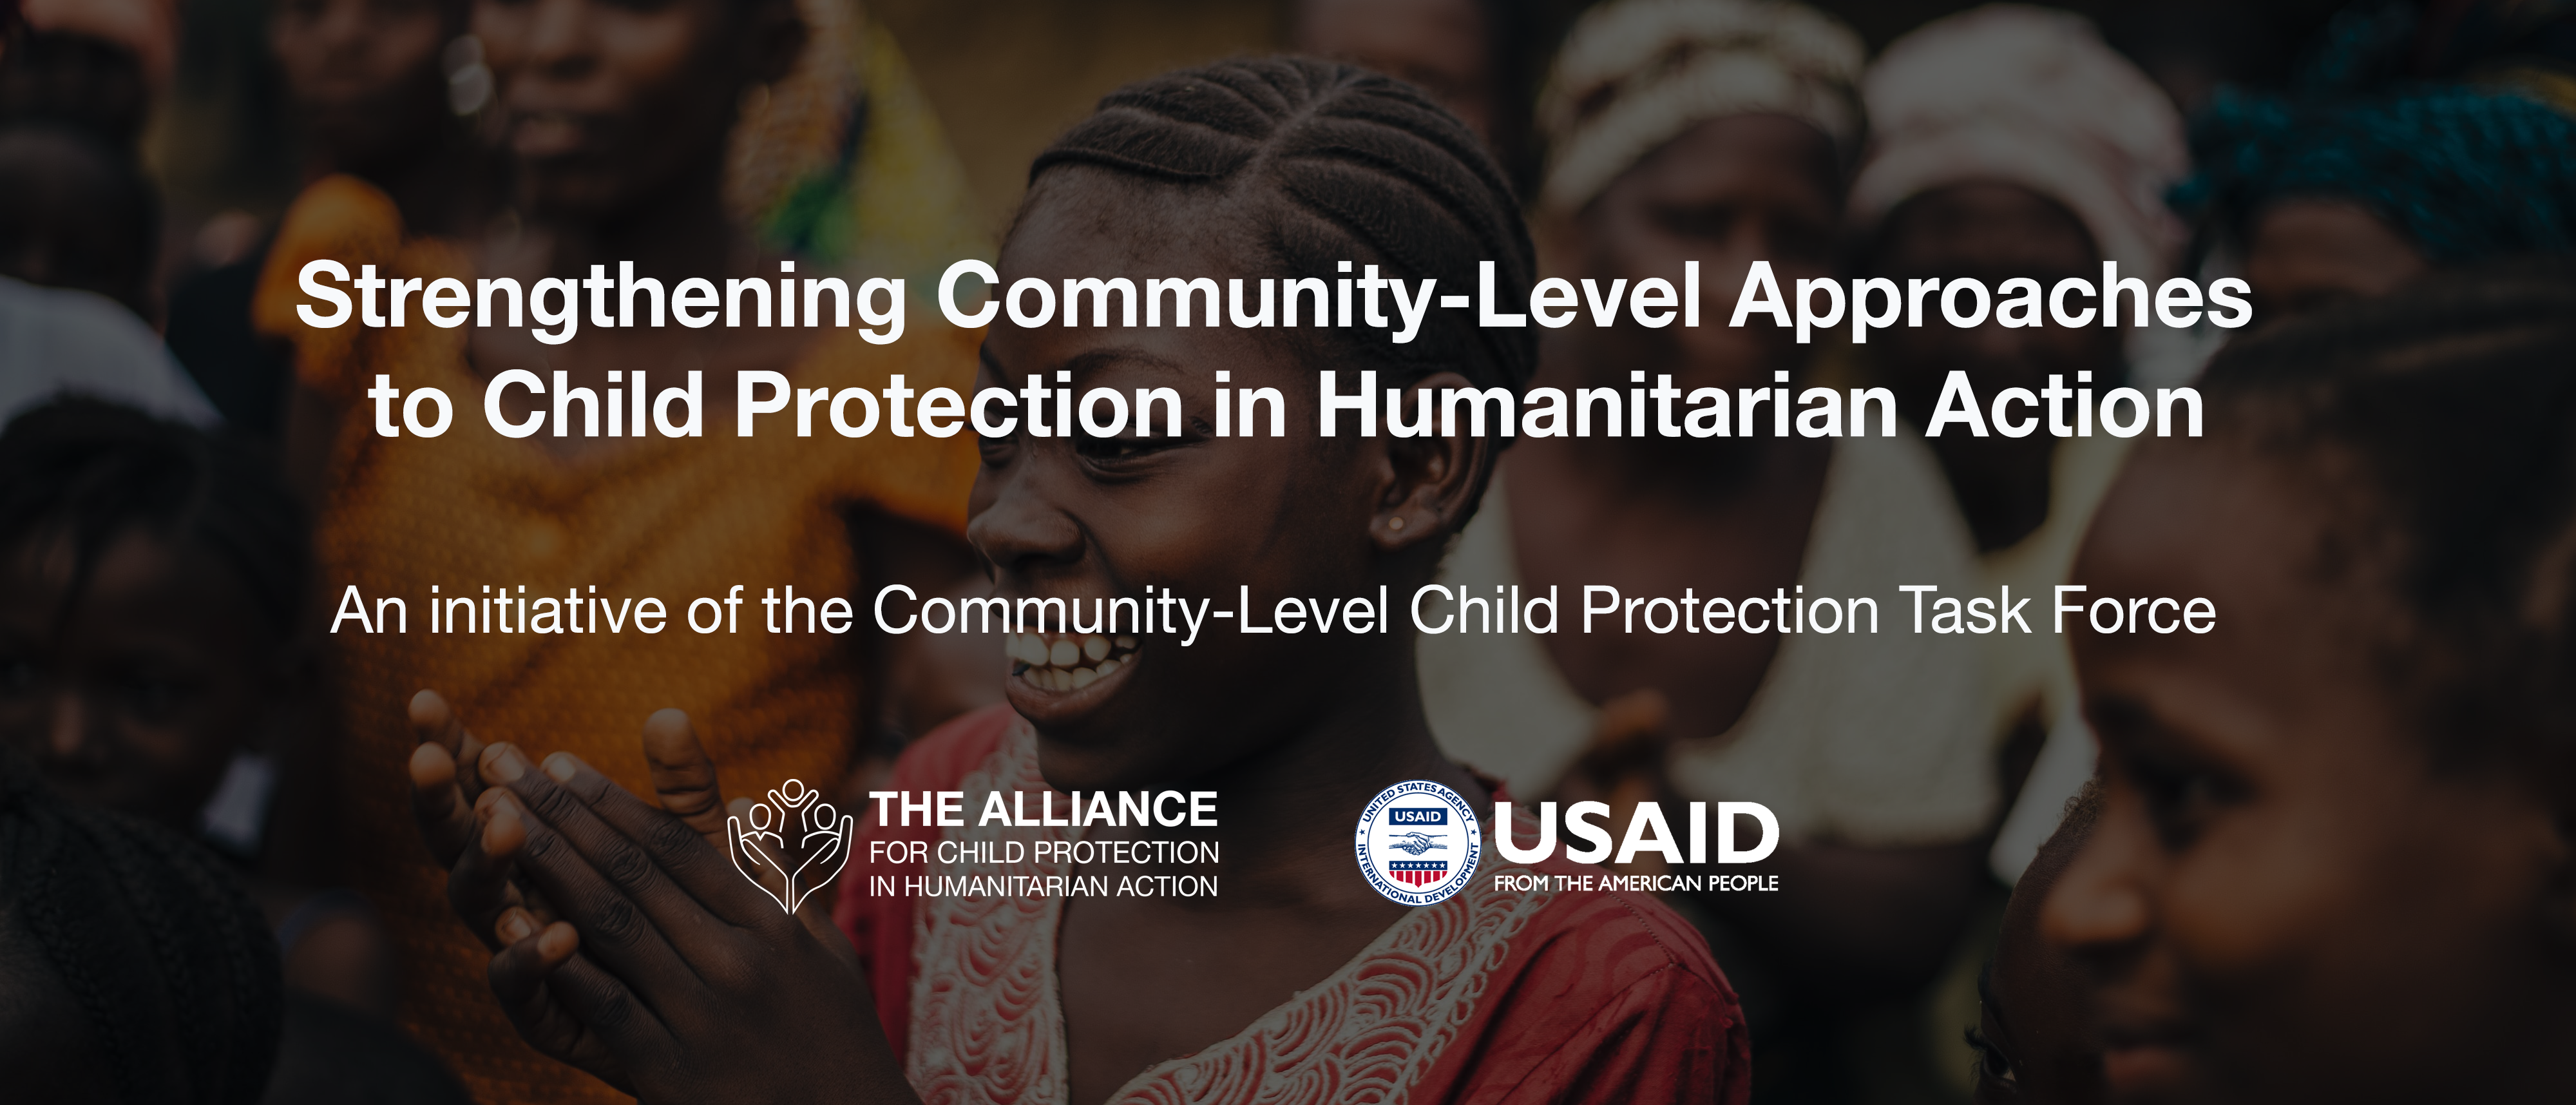 Strengthening Community-Level Approaches to Child Protection in Humanitarian Action